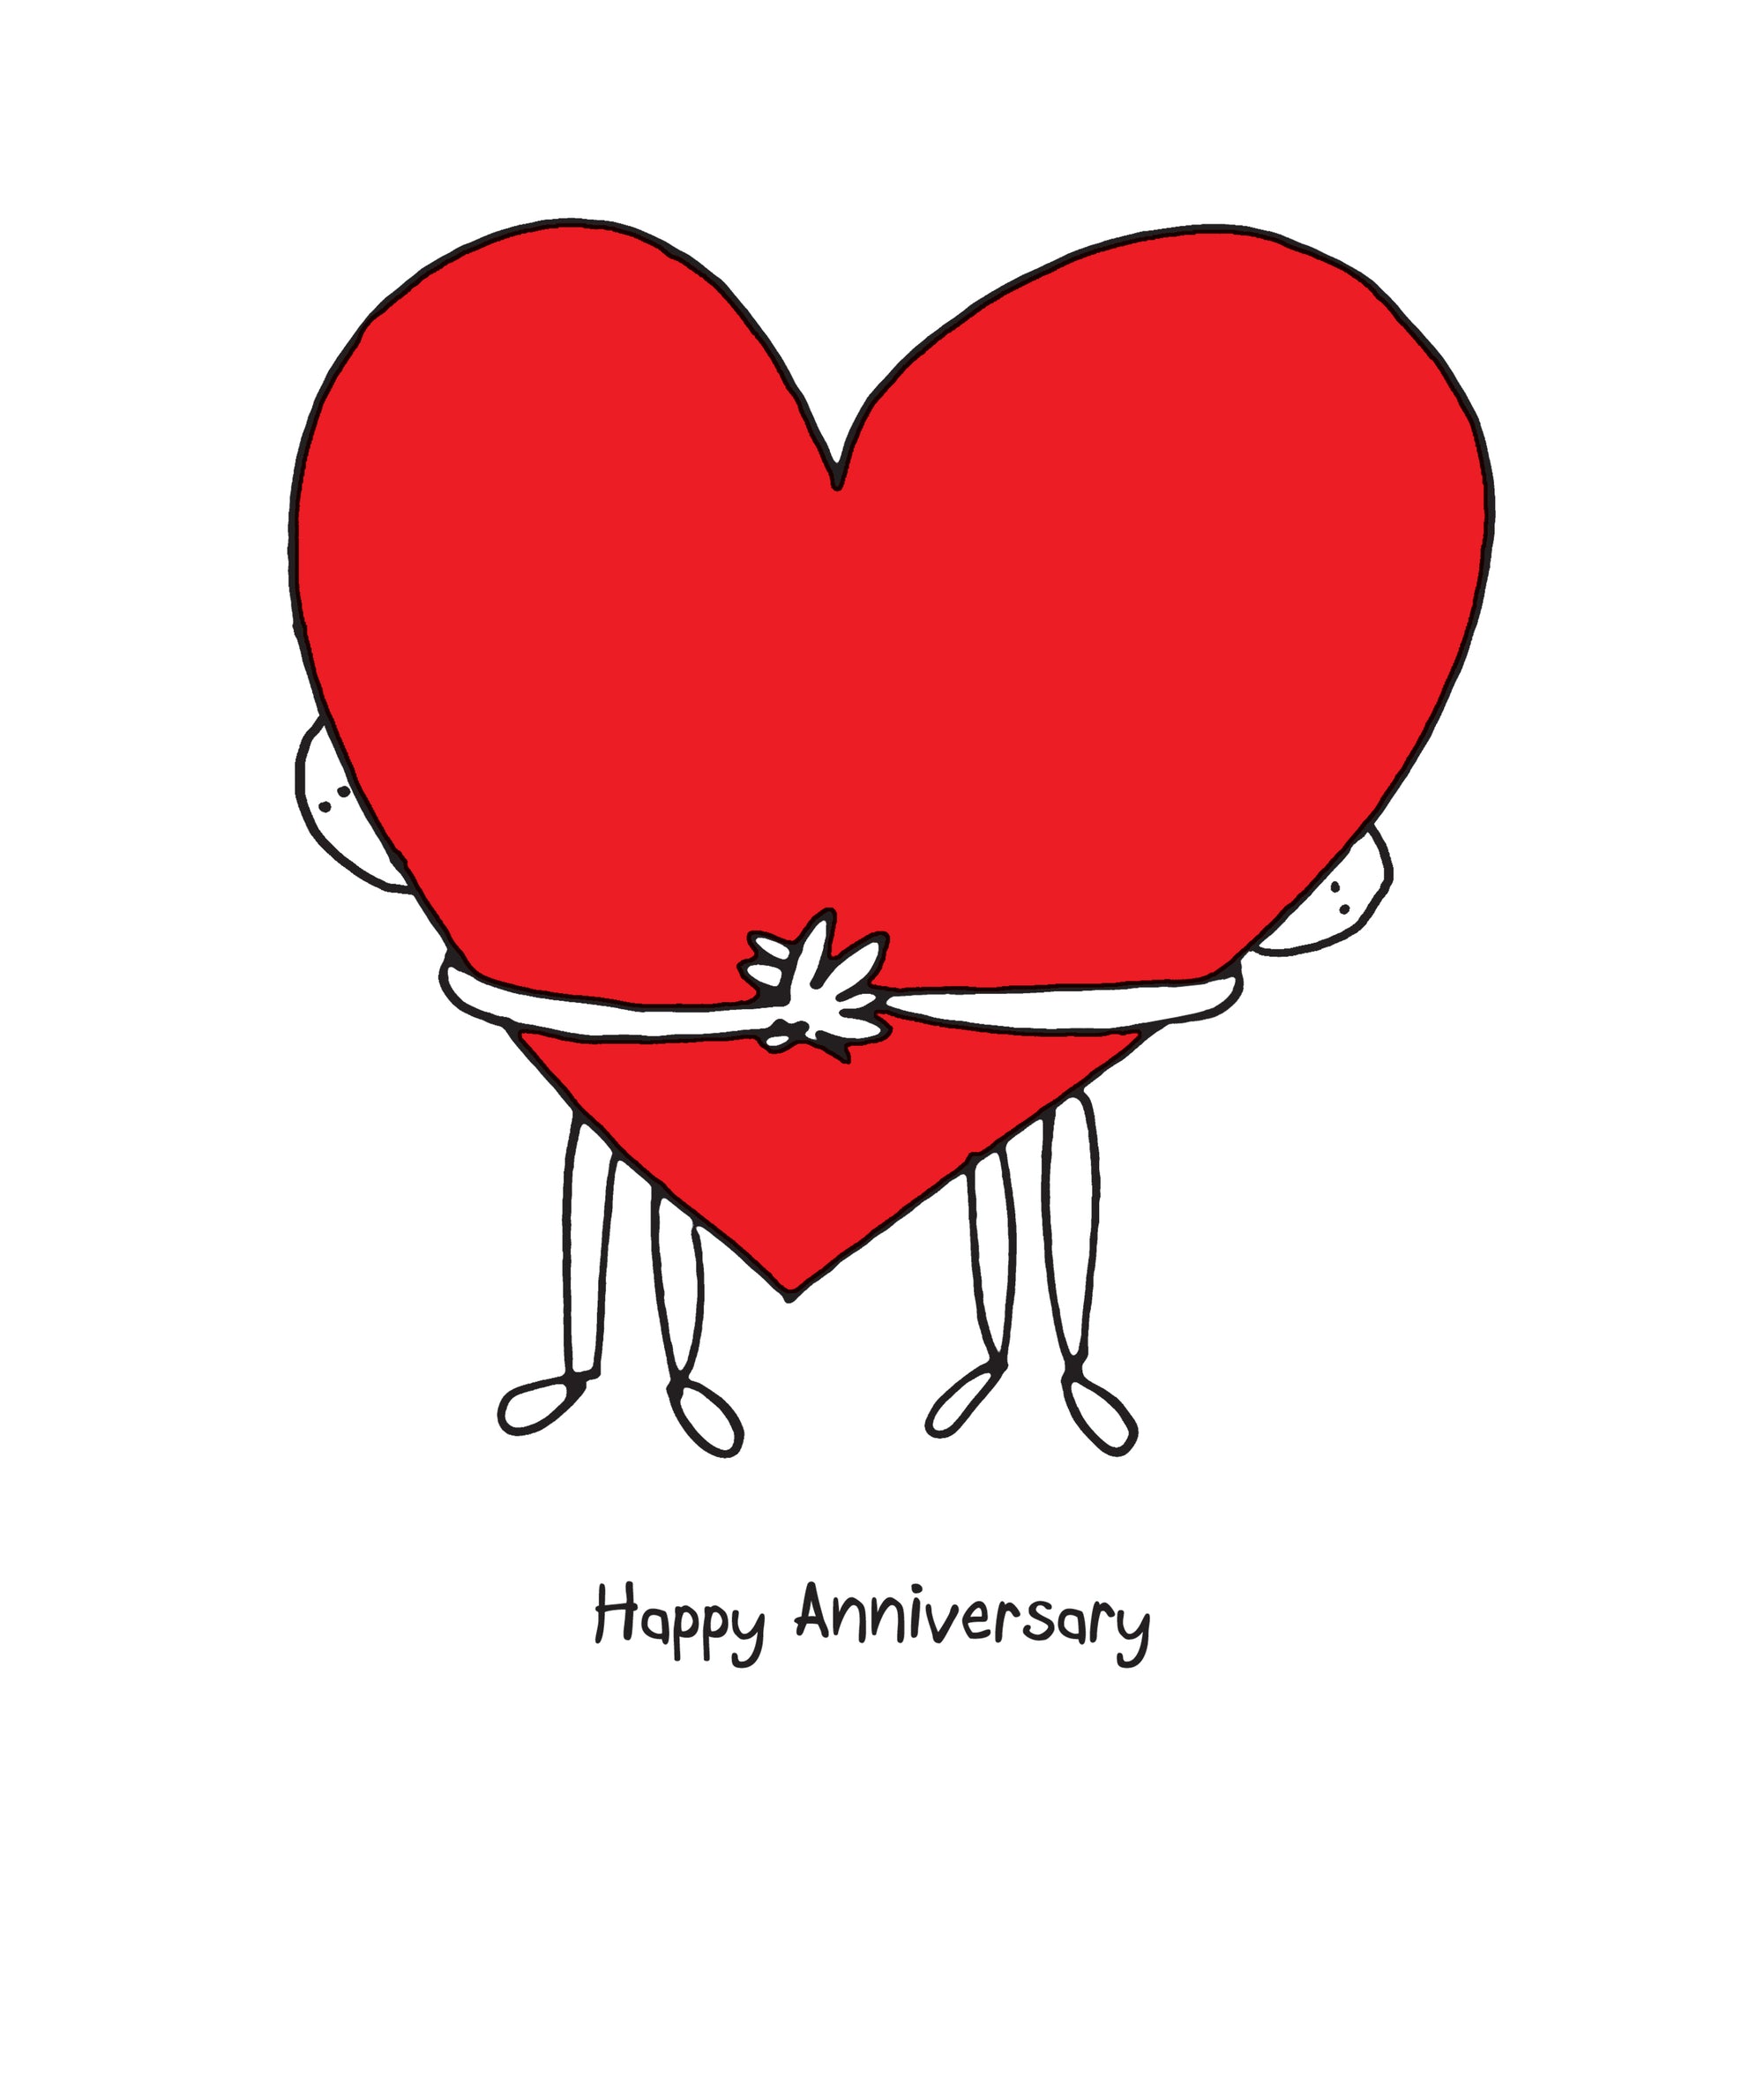 Embraced Heart Anniversary Card from Penny Black